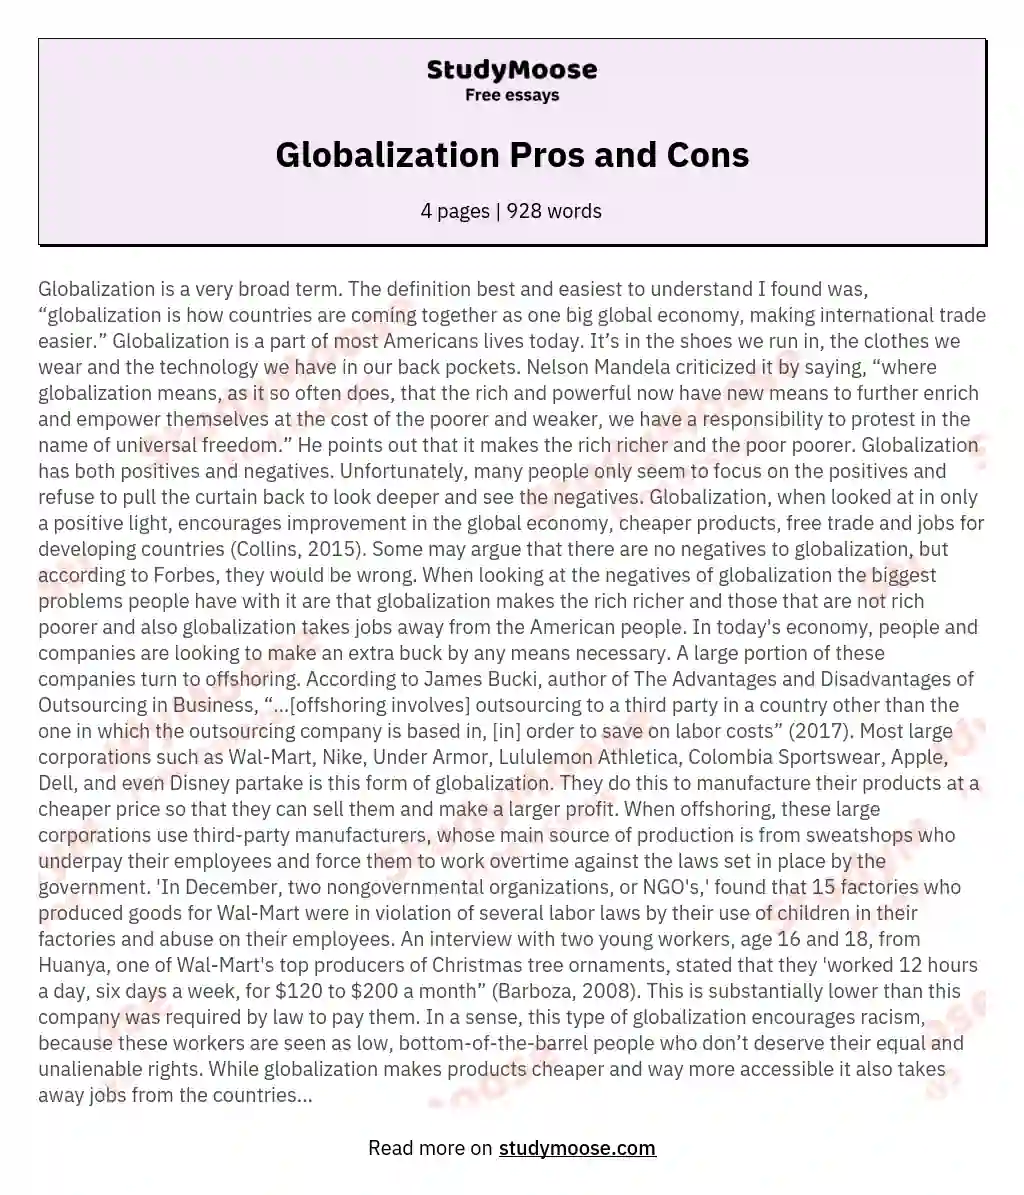 Globalization Pros and Cons essay